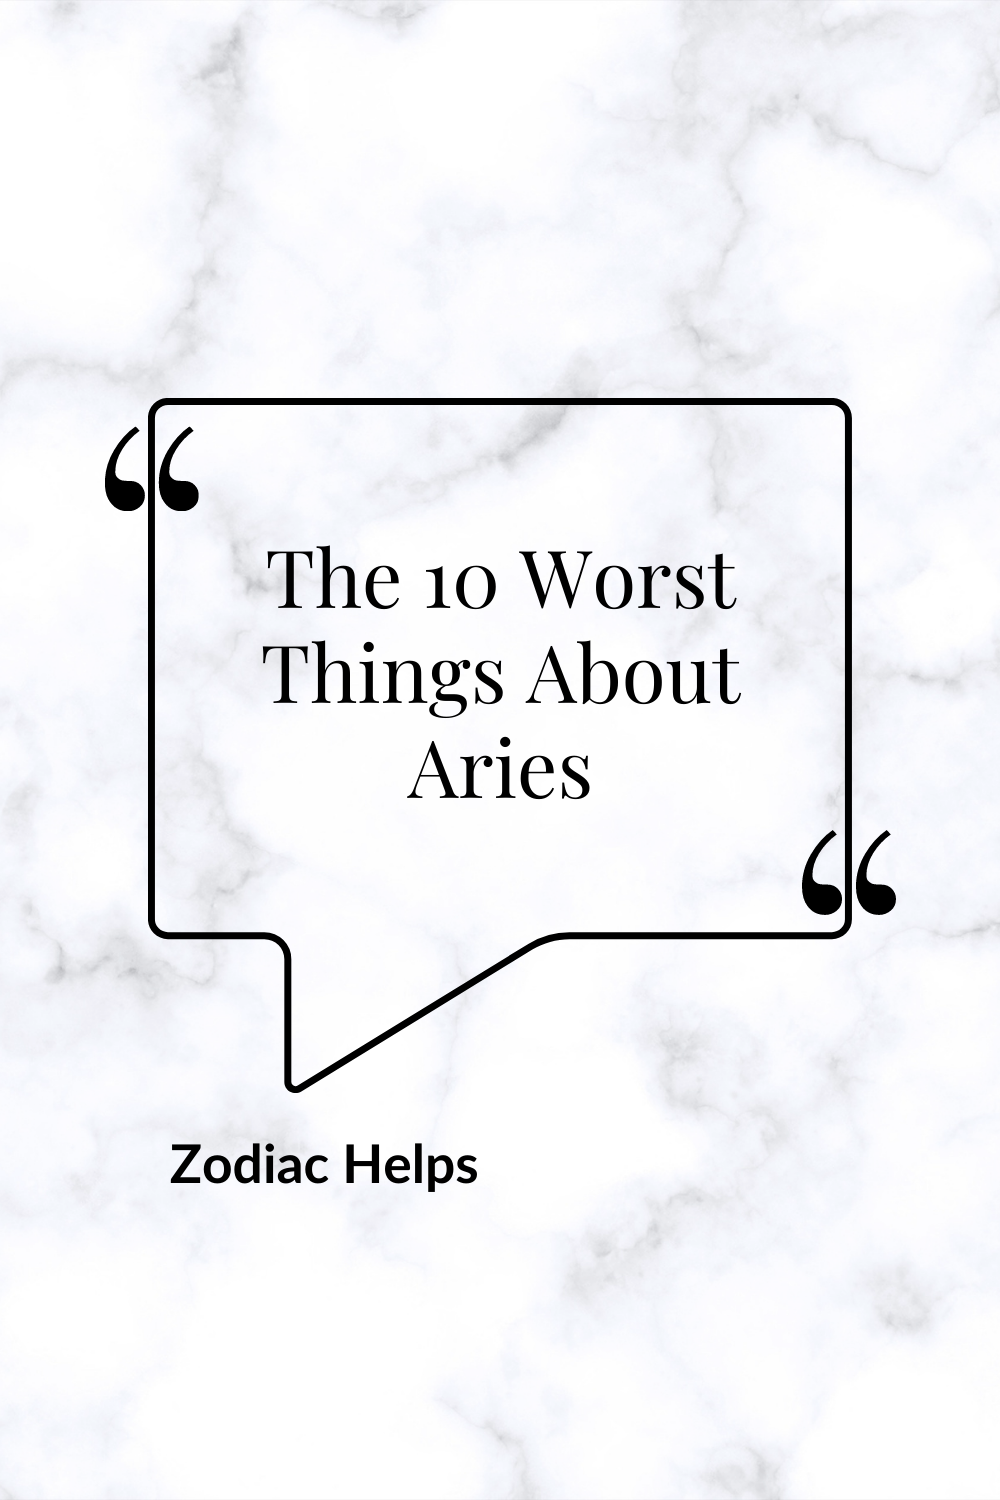 The 10 Worst Things About Aries